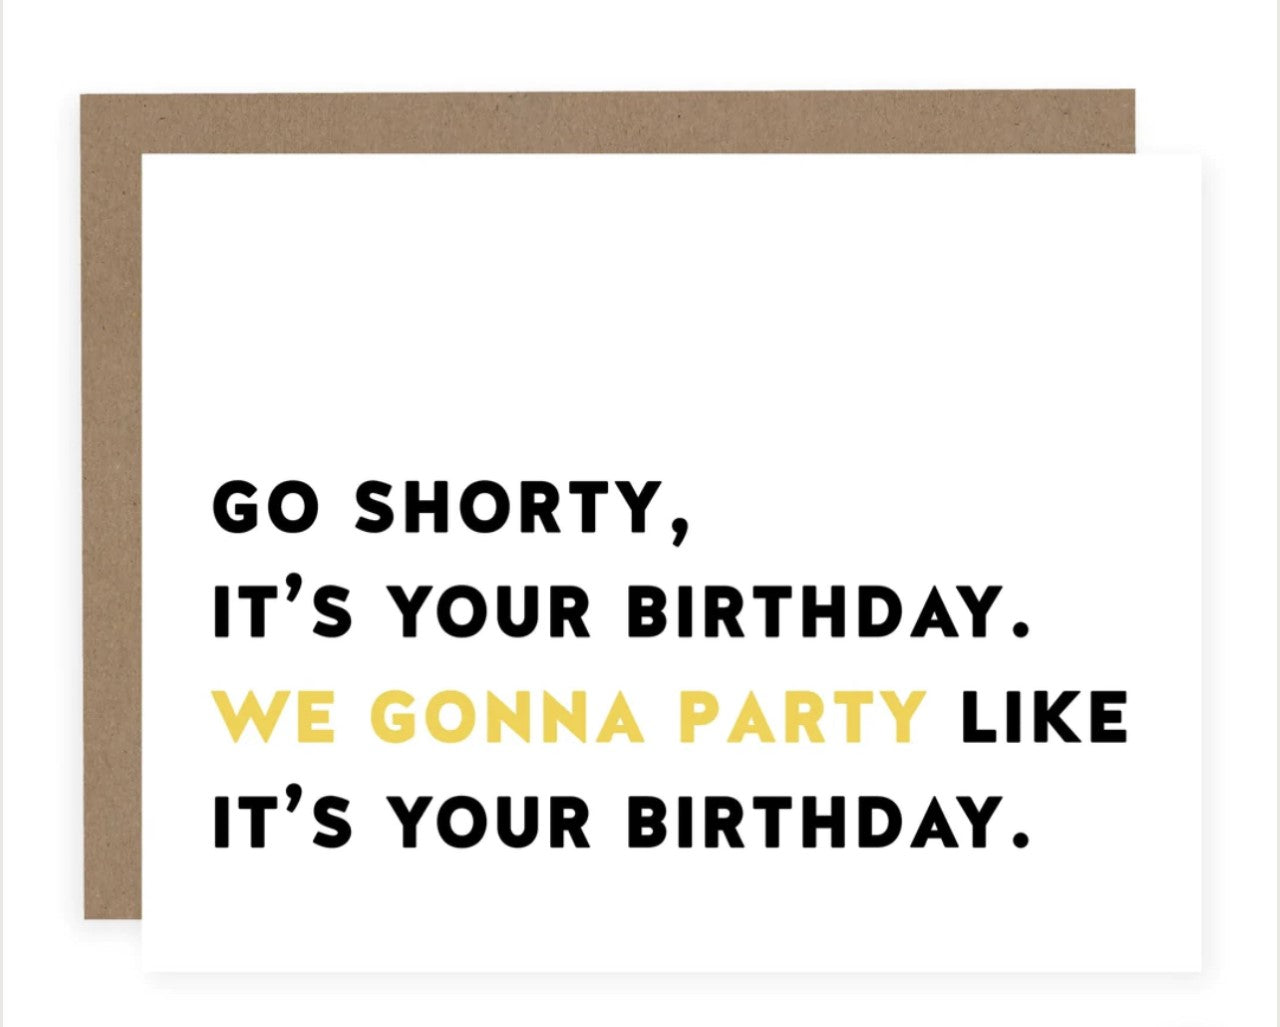 GO SHORTY IT'S YOUR BIRTHDAY | CARD